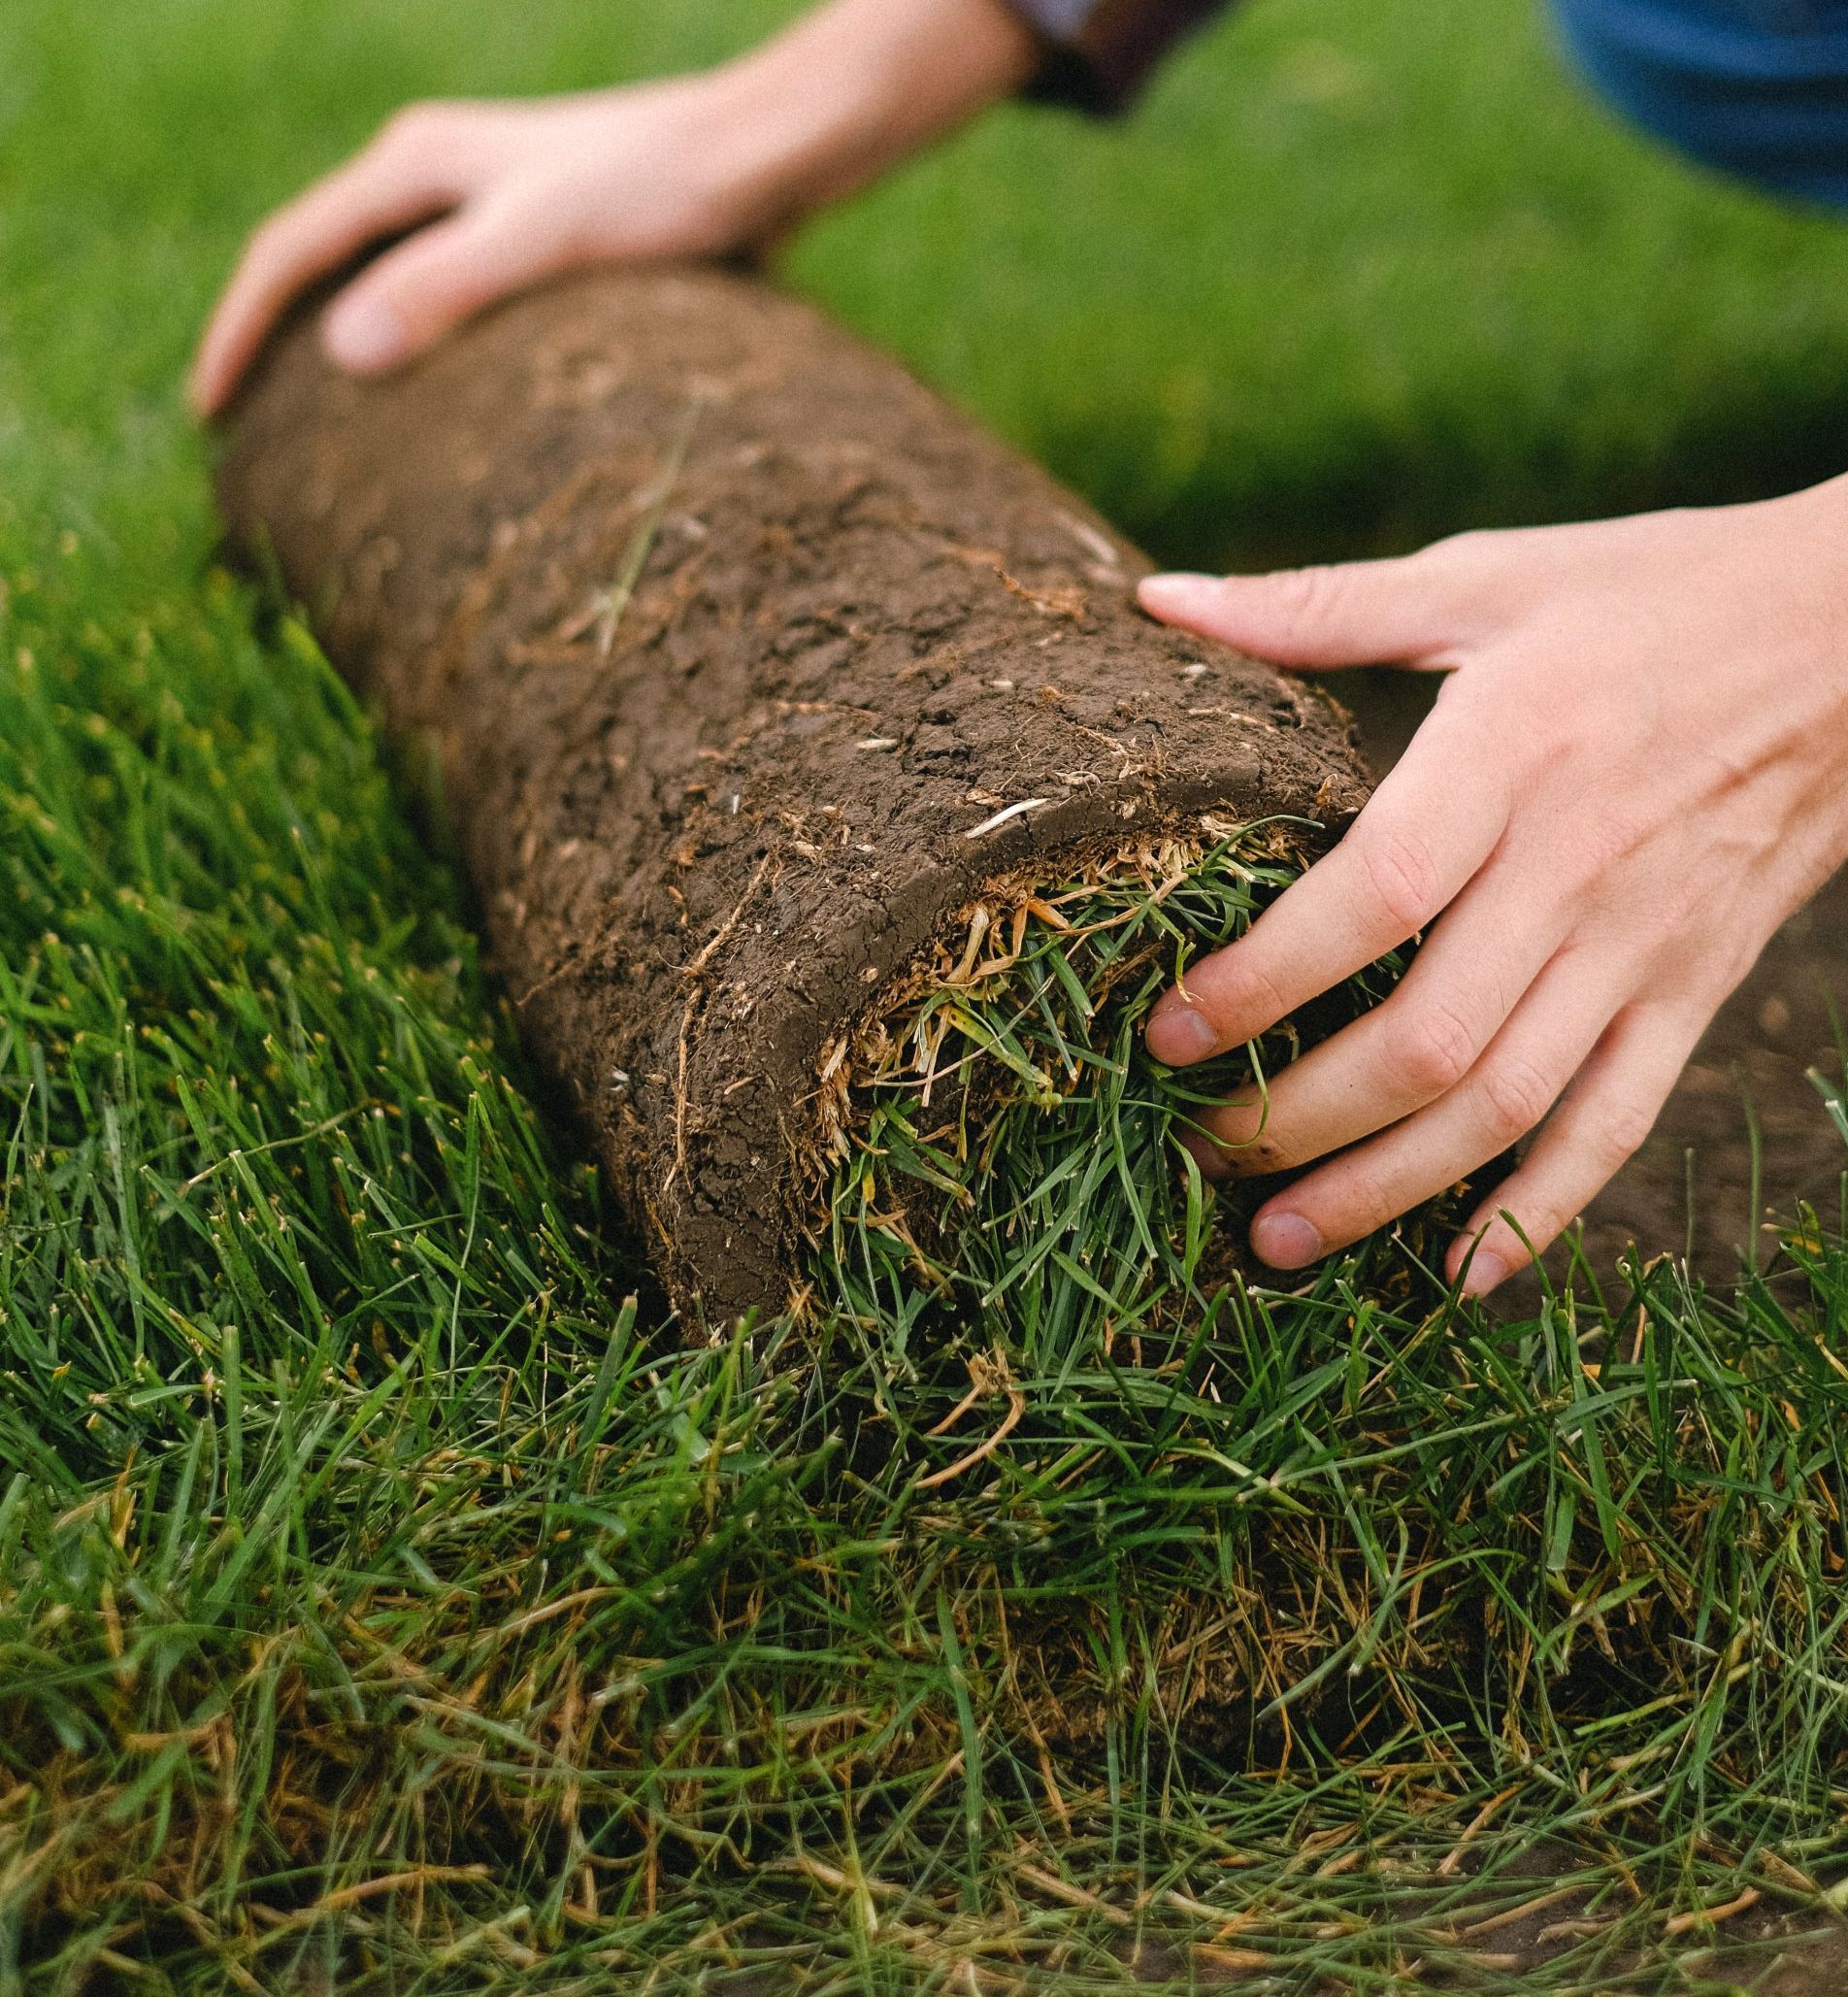 Residential Sod Installation: Hiring a Professional vs. Doing It Yourself